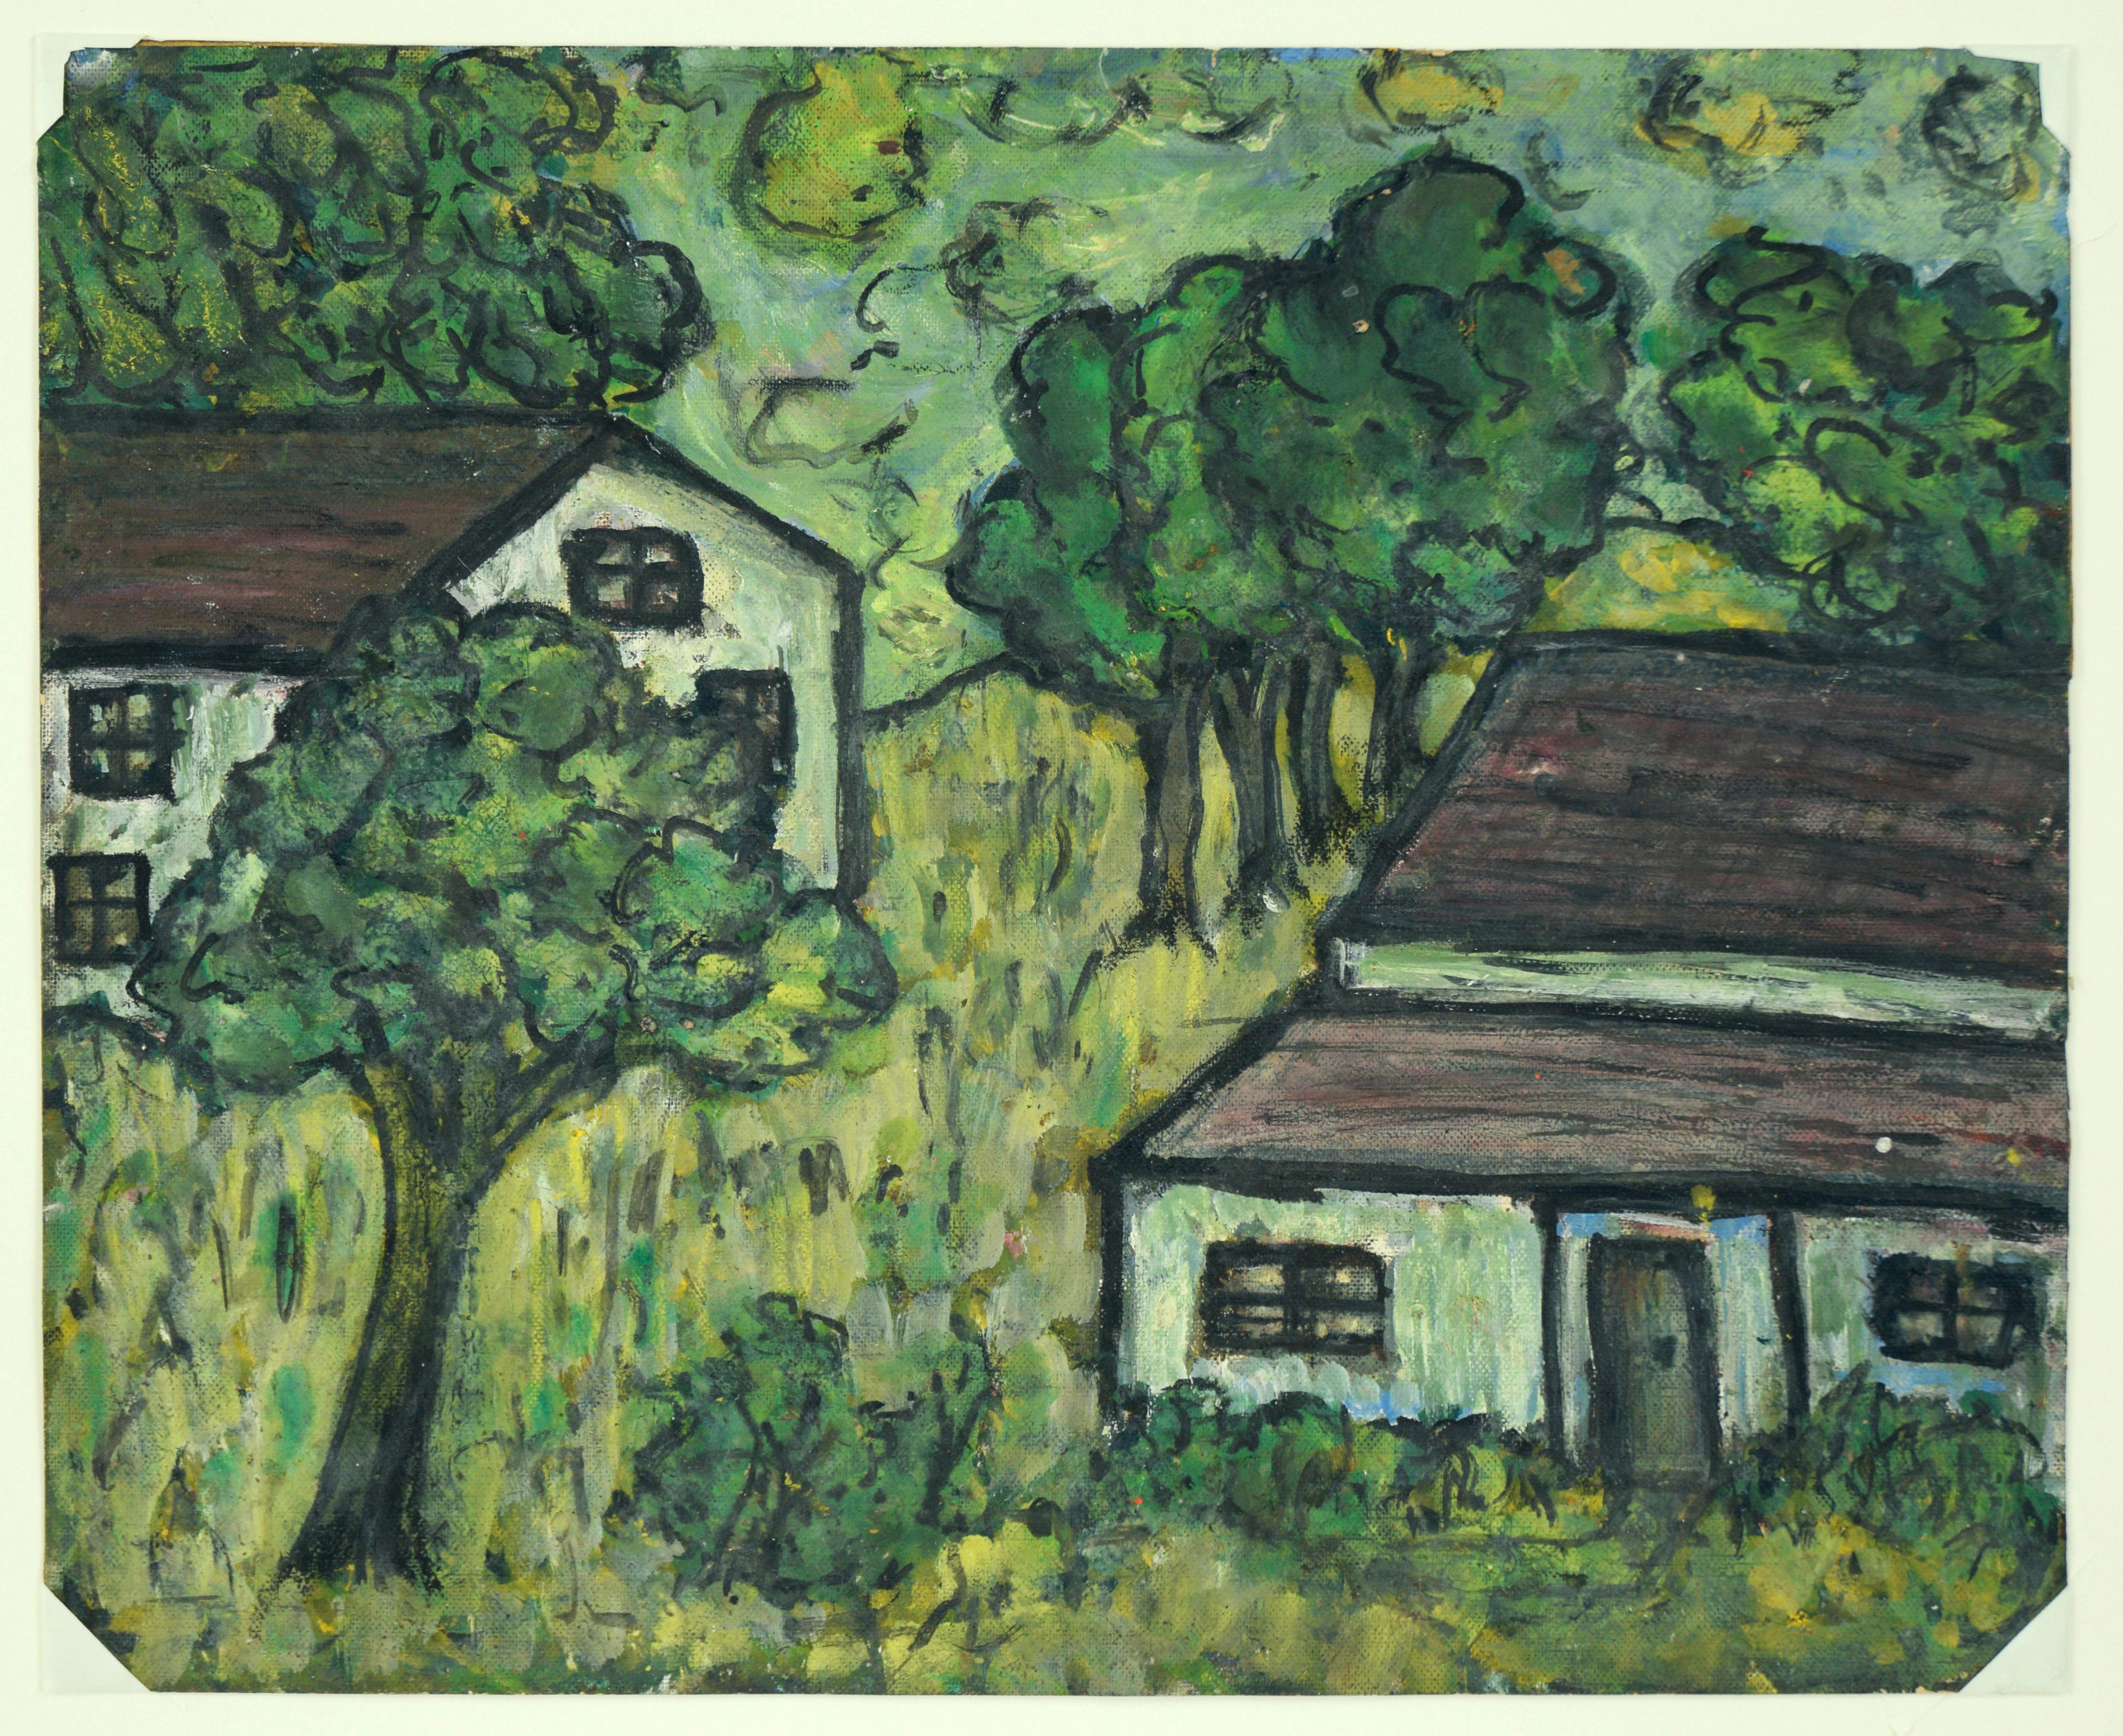 House In The Green - Original Acrylic On Paper - American Impressionist Painting by Honora Berg